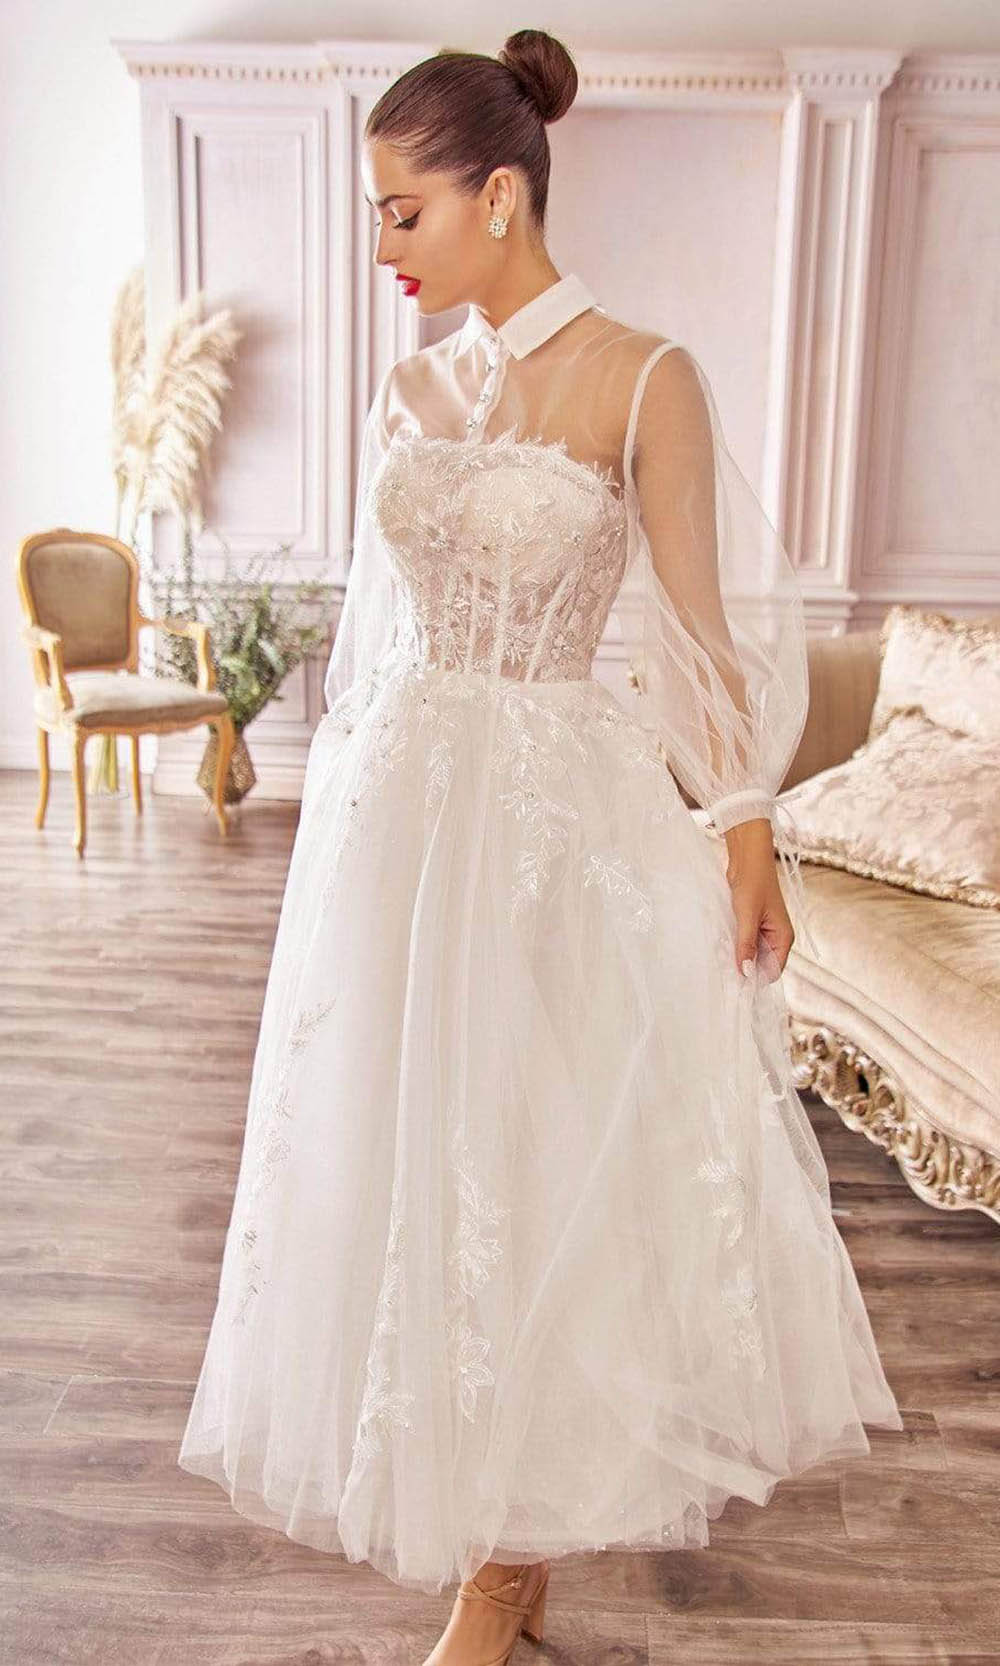 Andrea and Leo - A1016 Collared Illusion Neckline Cocktail Length Bridal Dress - 1 pc Off White In Size 16 Available CCSALE 16 / Off White